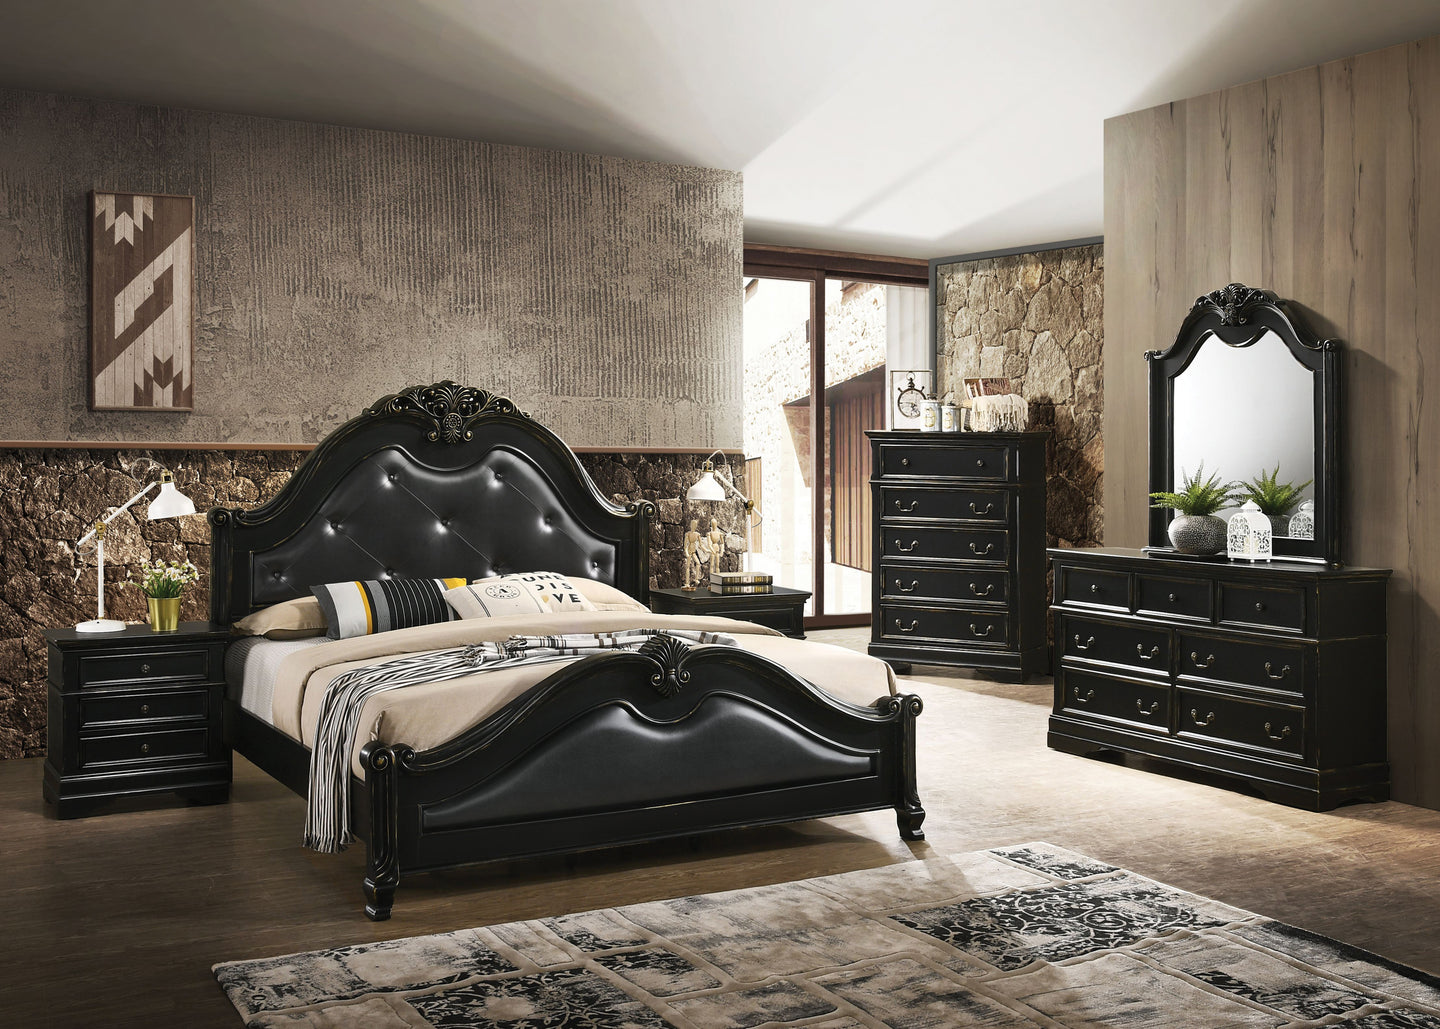 Traditional Styled Bedroom In A Black Finish With Distressed Highlights